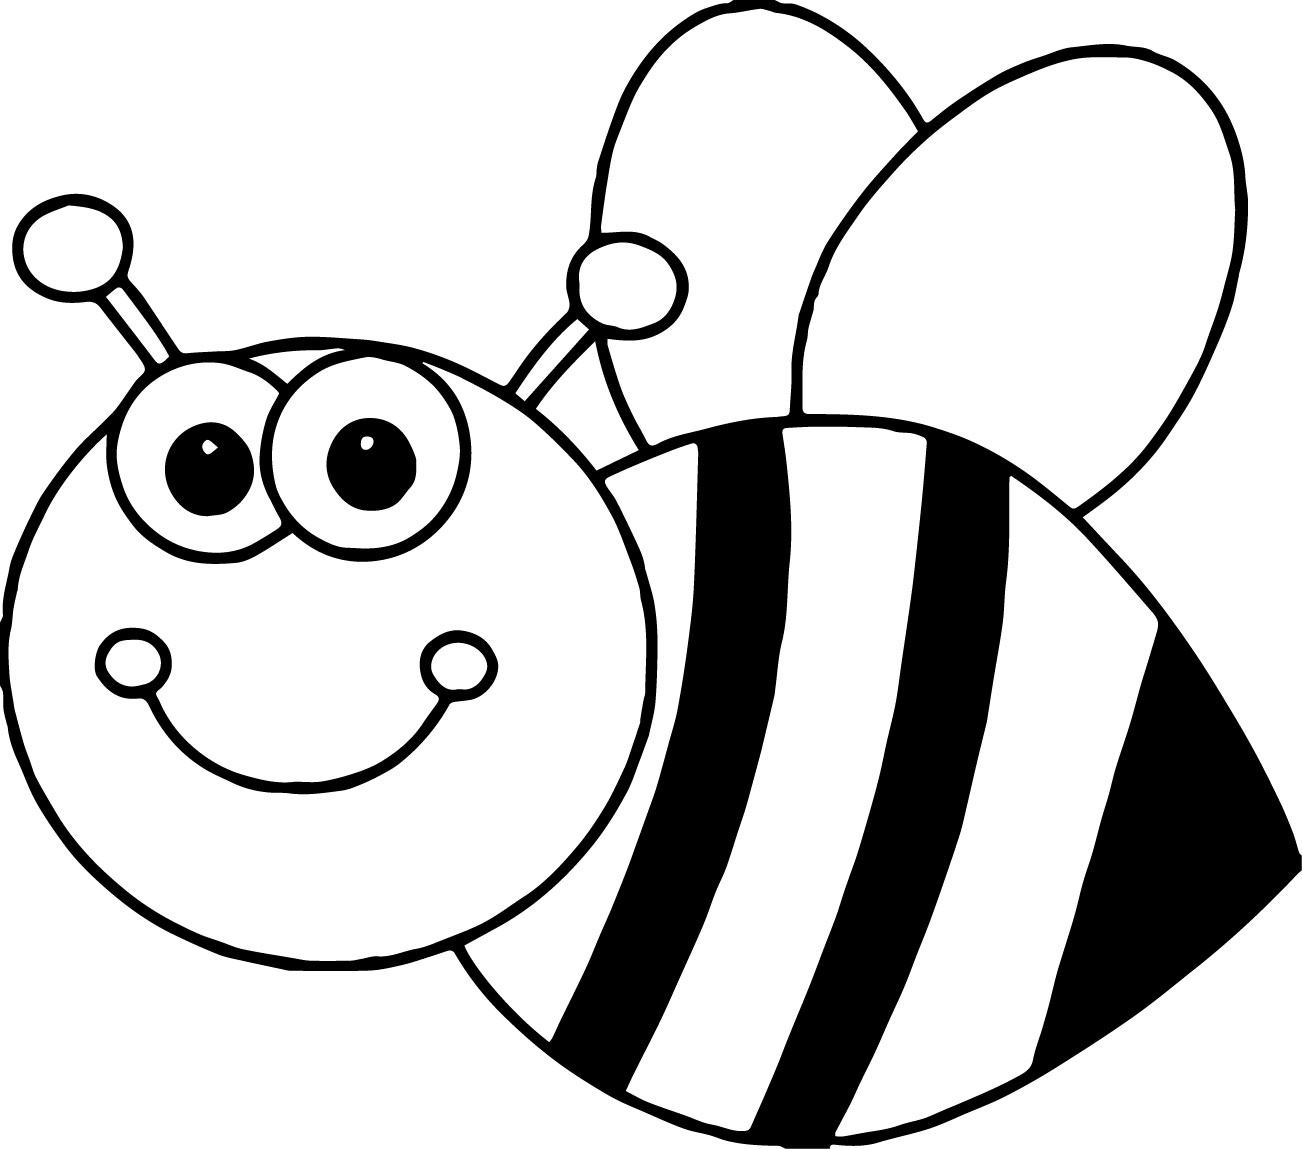 Bumble Bee Coloring Page Sheets, draw bumble bee coloring pages ...